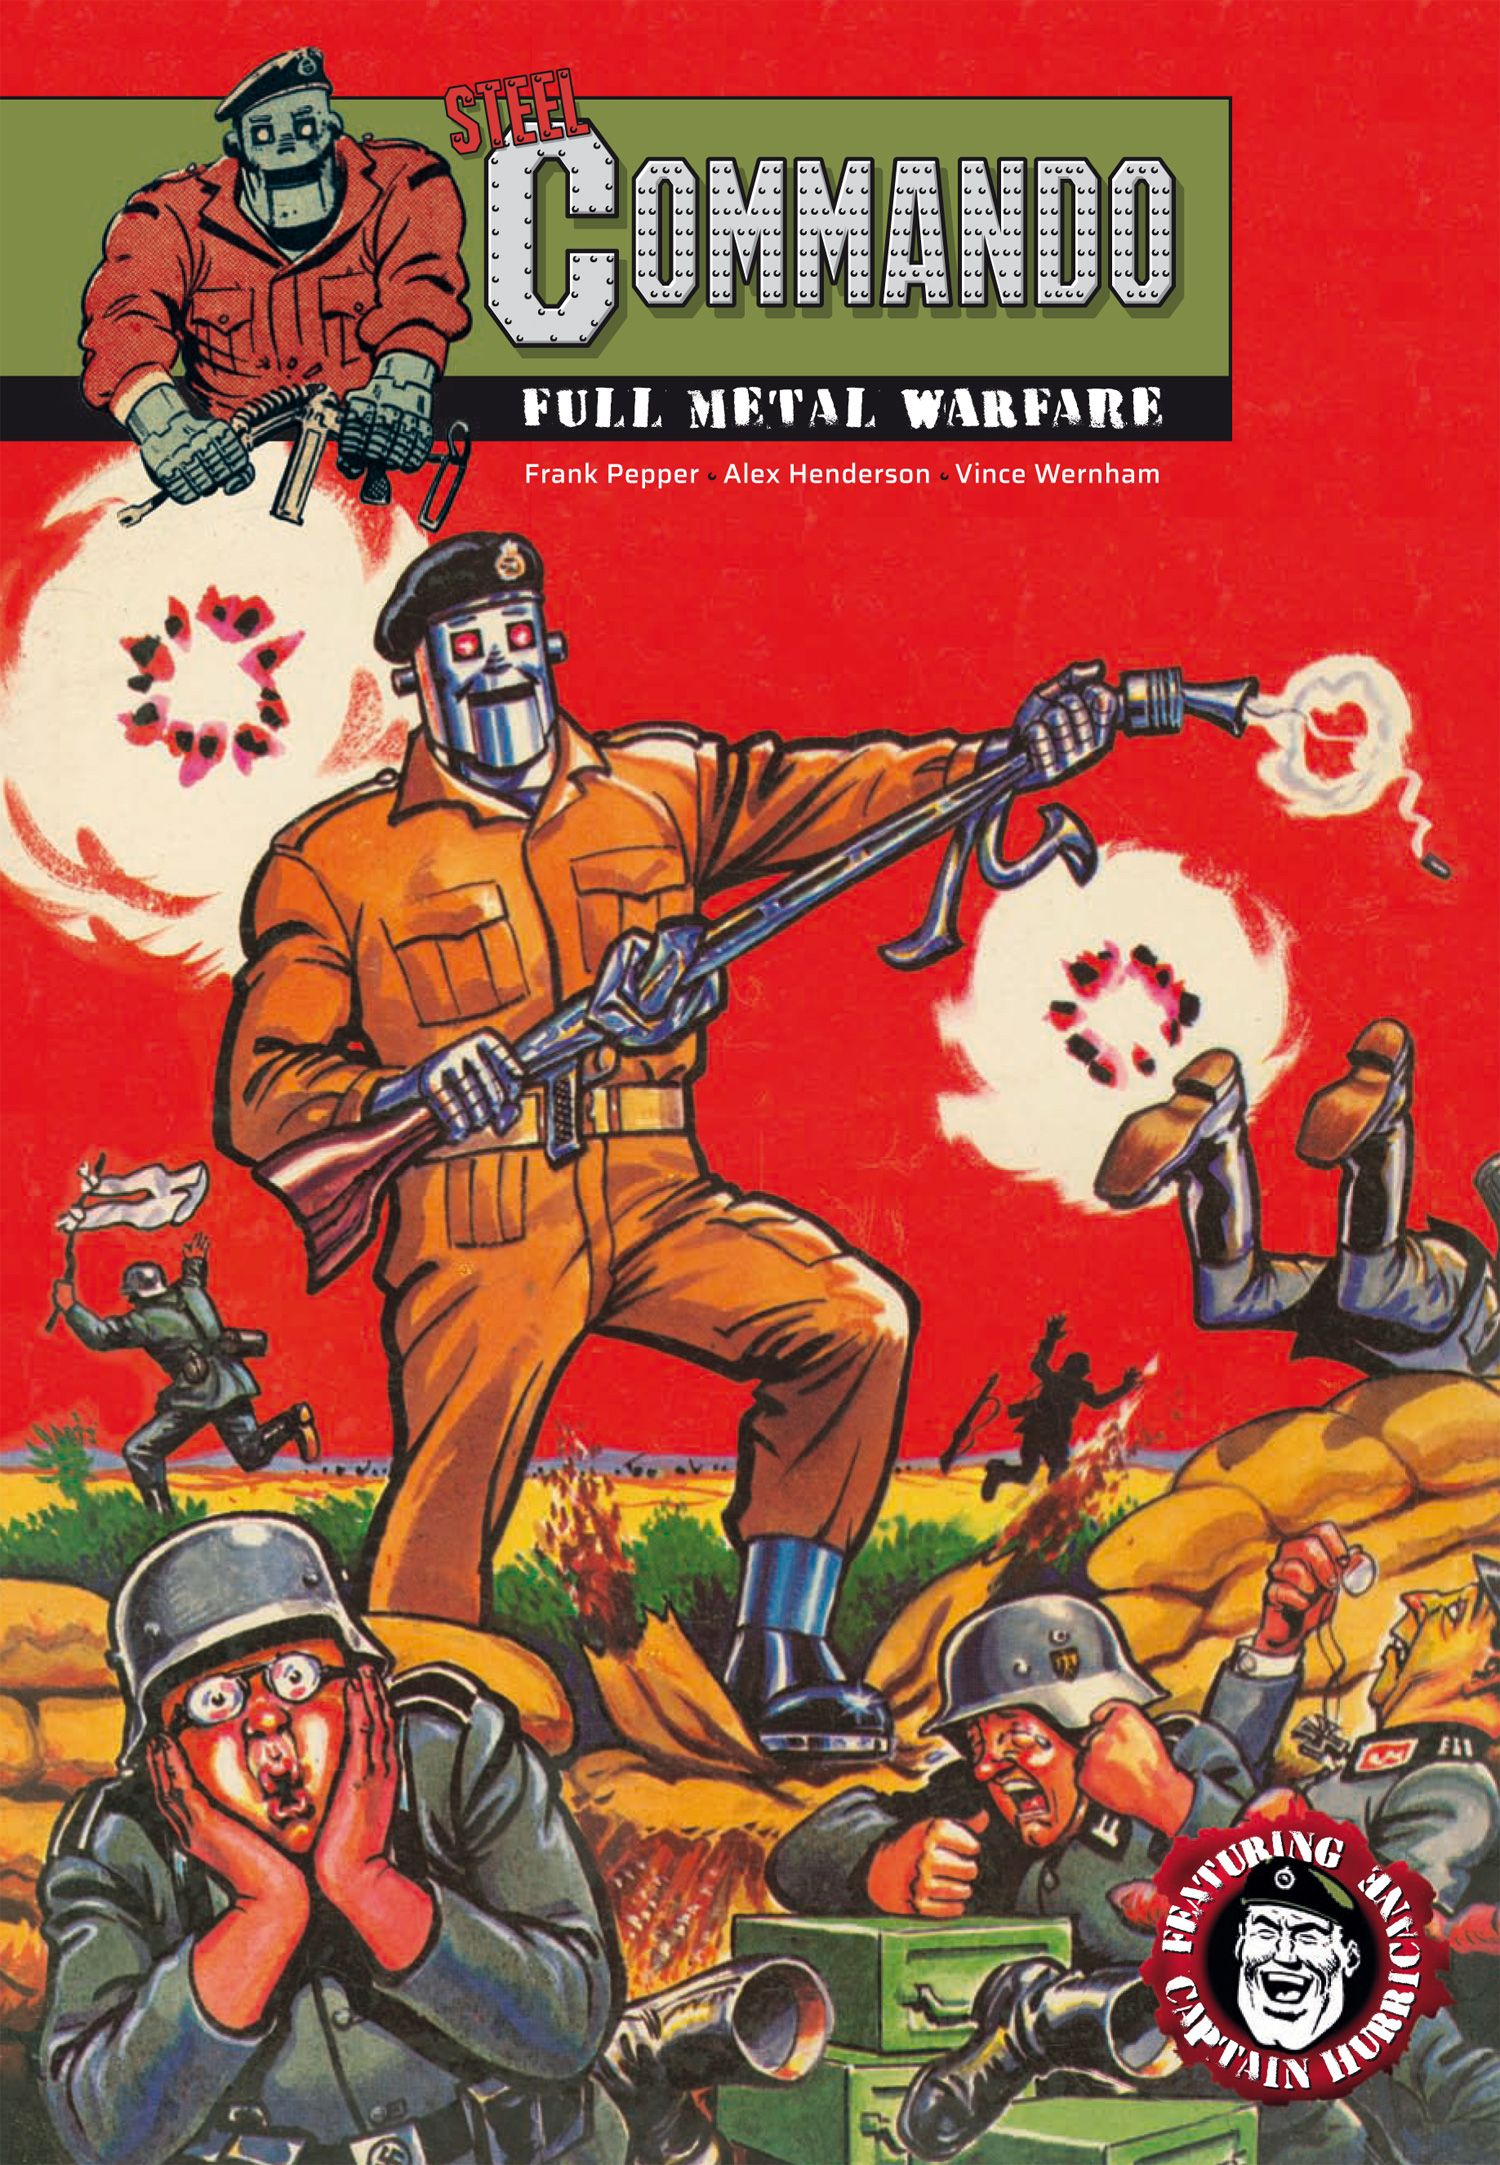 OUT NOW: Steel Commando digest